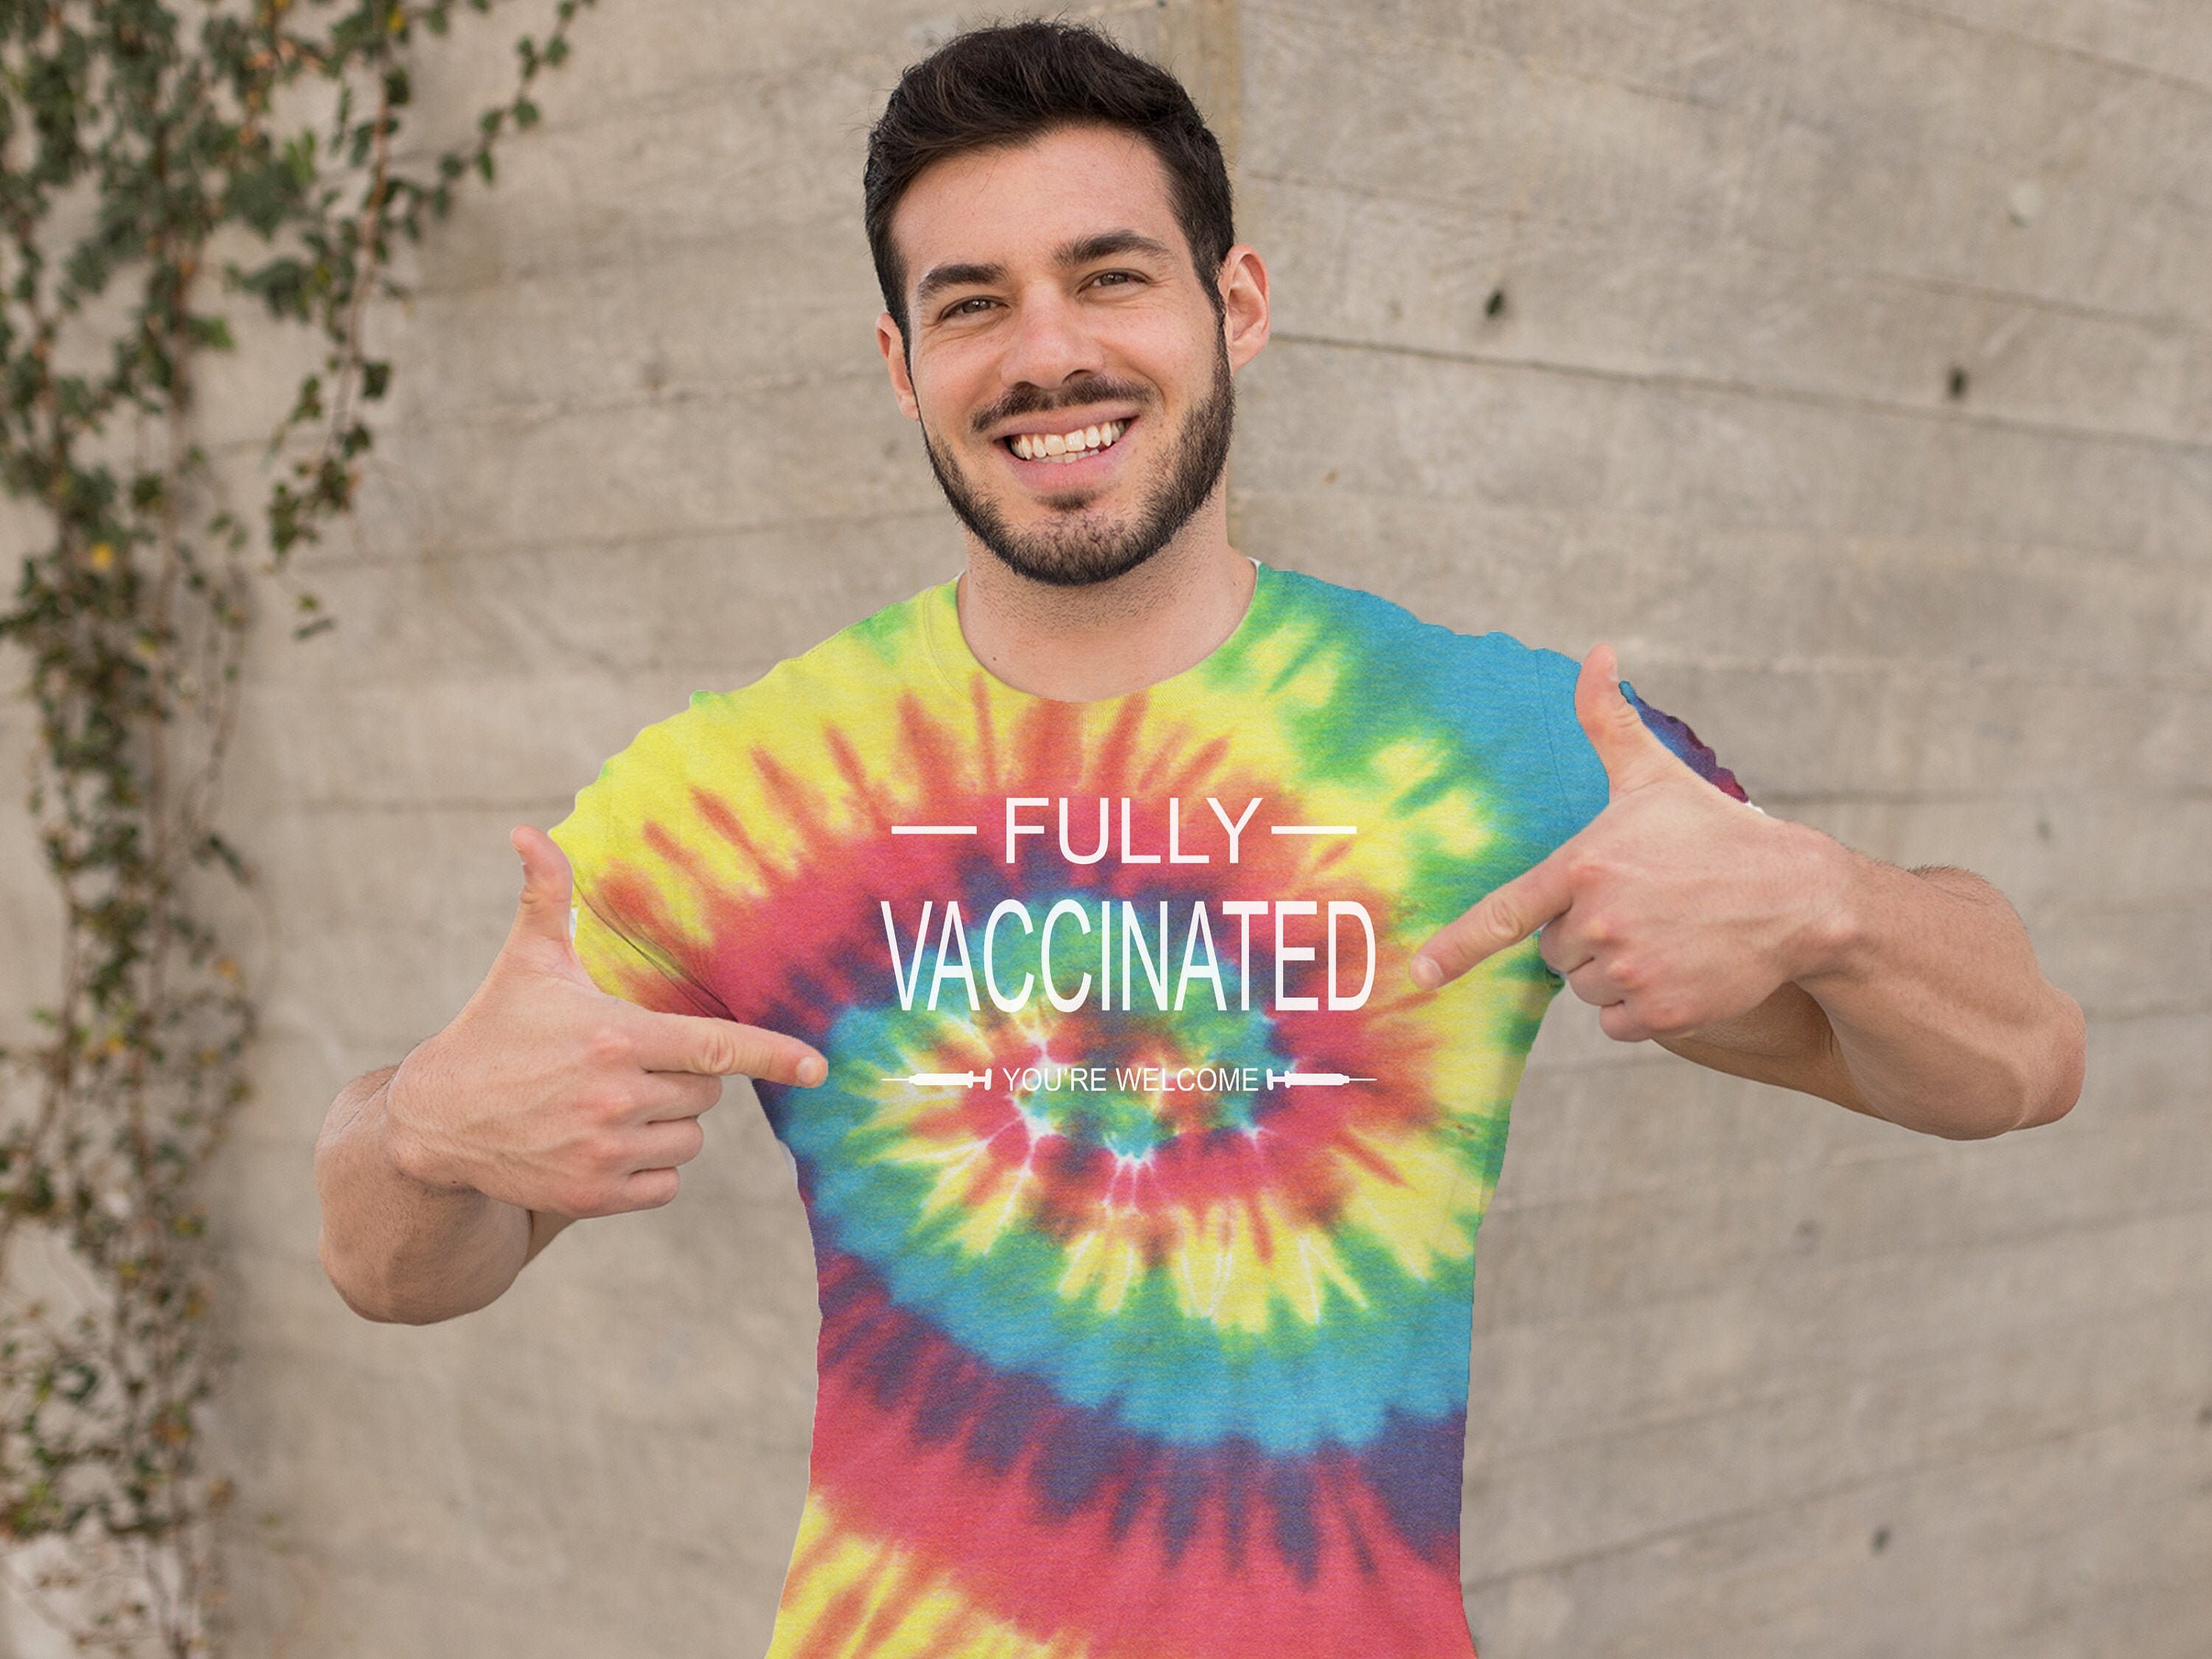 Officially Vaccinated Shirt Vaccinated Tee Tie Dye Shirt Graphic T-shirt Size XL Unisex Adult Covid 19 Vaccine